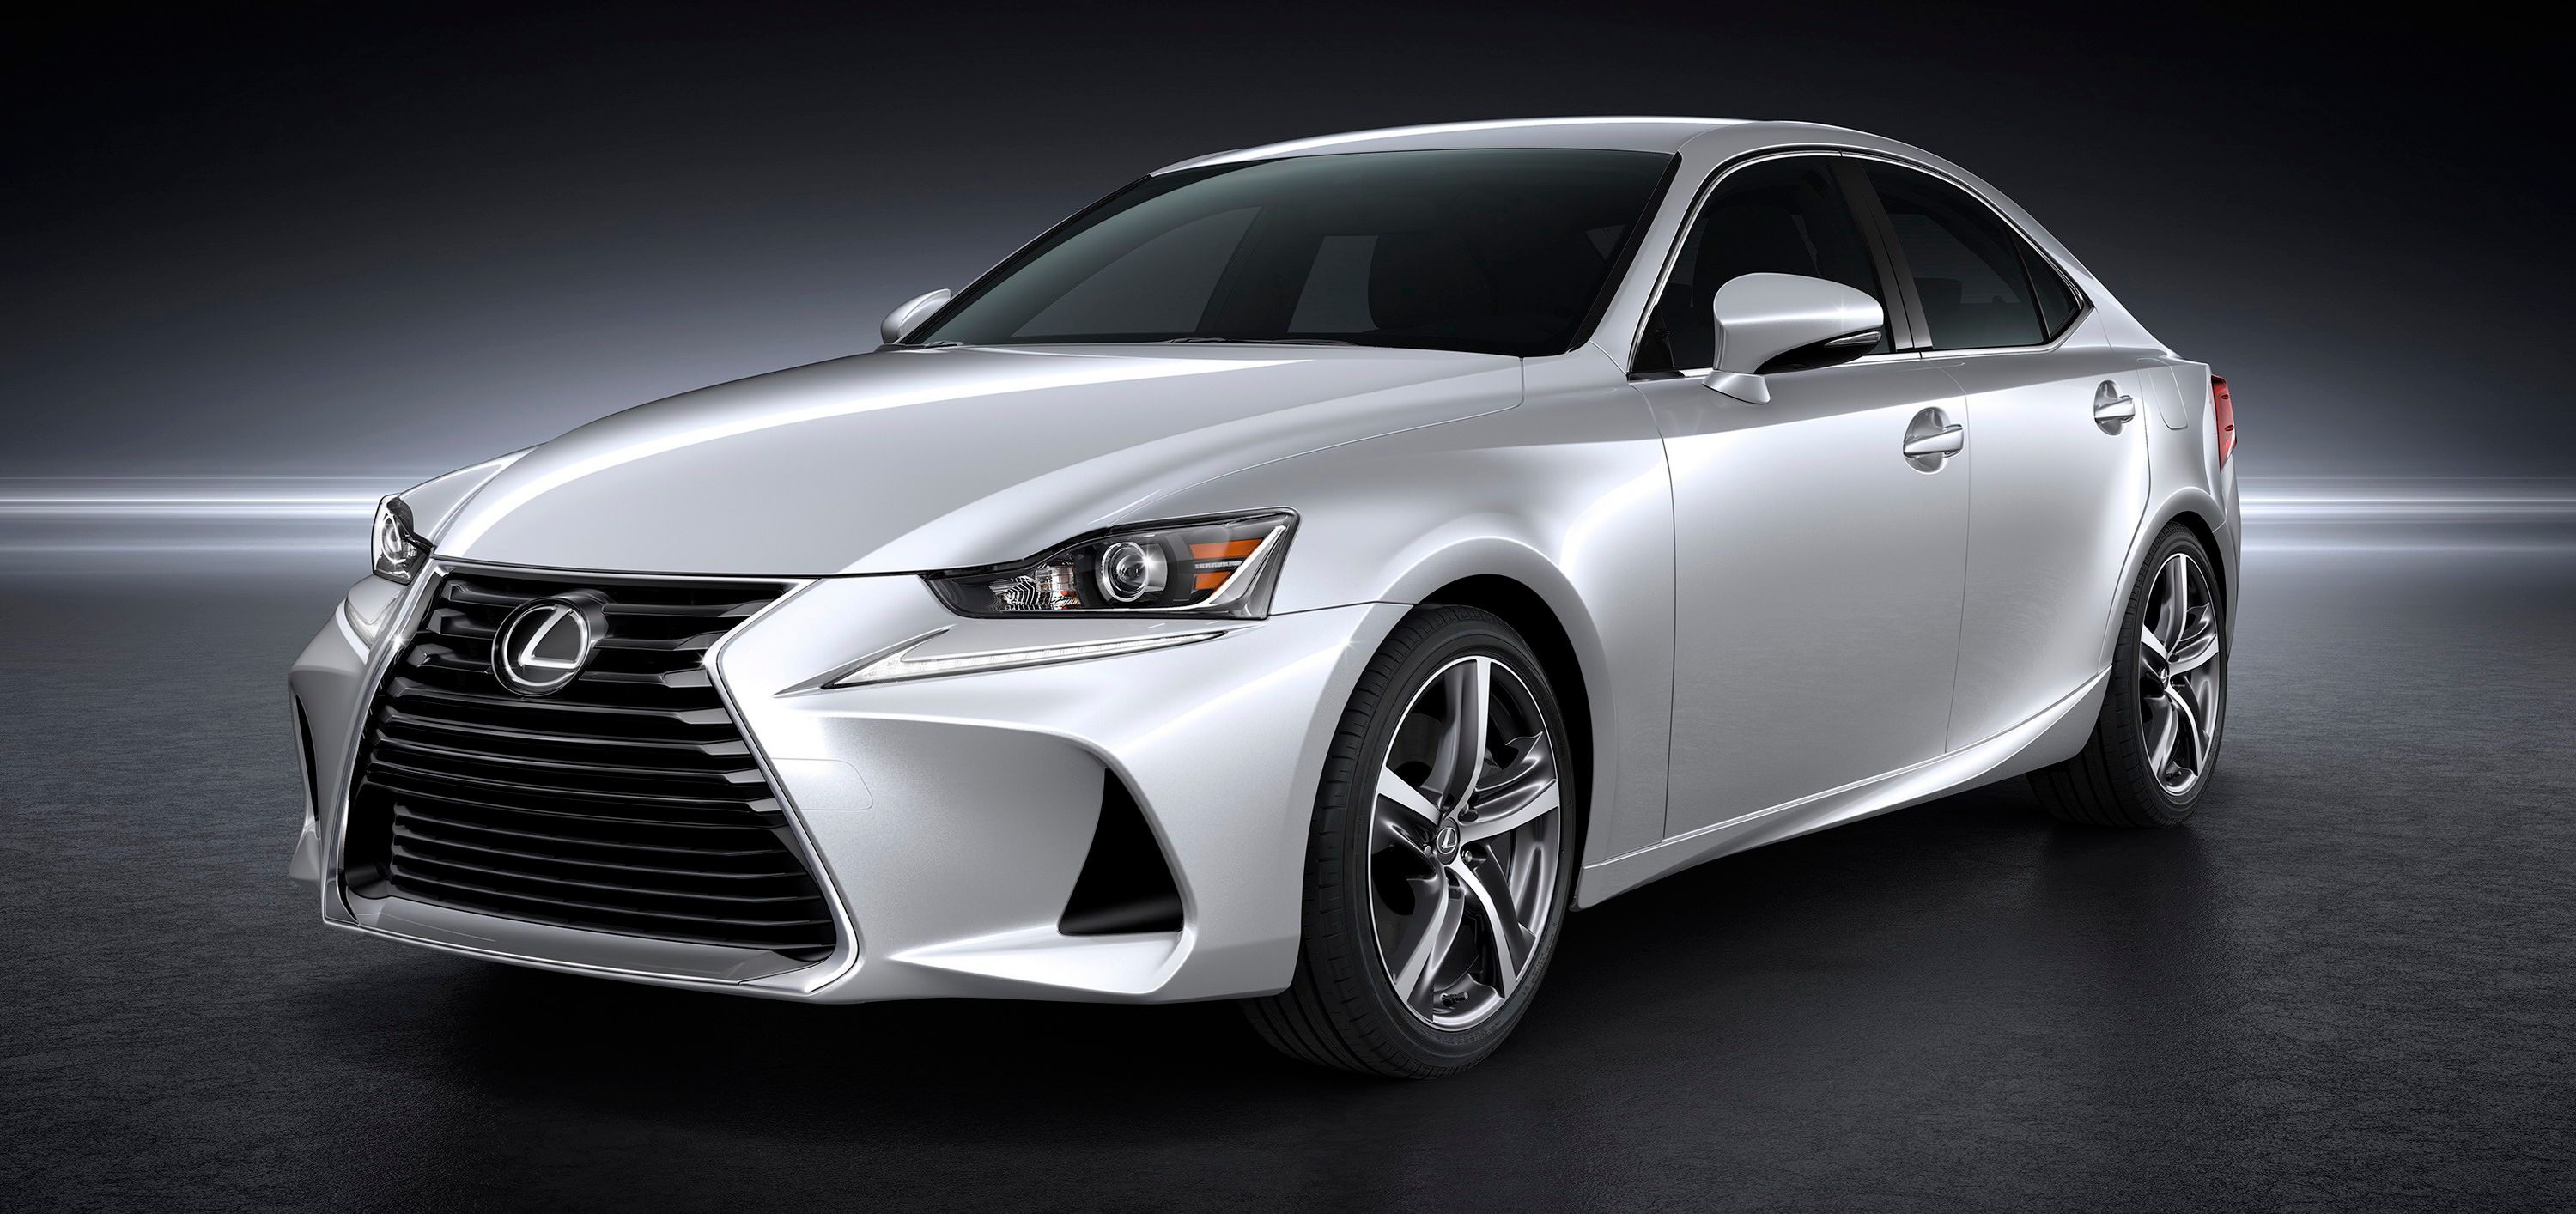 2019 The 2021 Lexus IS Could Inherit the 2020 Toyota Supra's BMW-Sourced Inline-Six